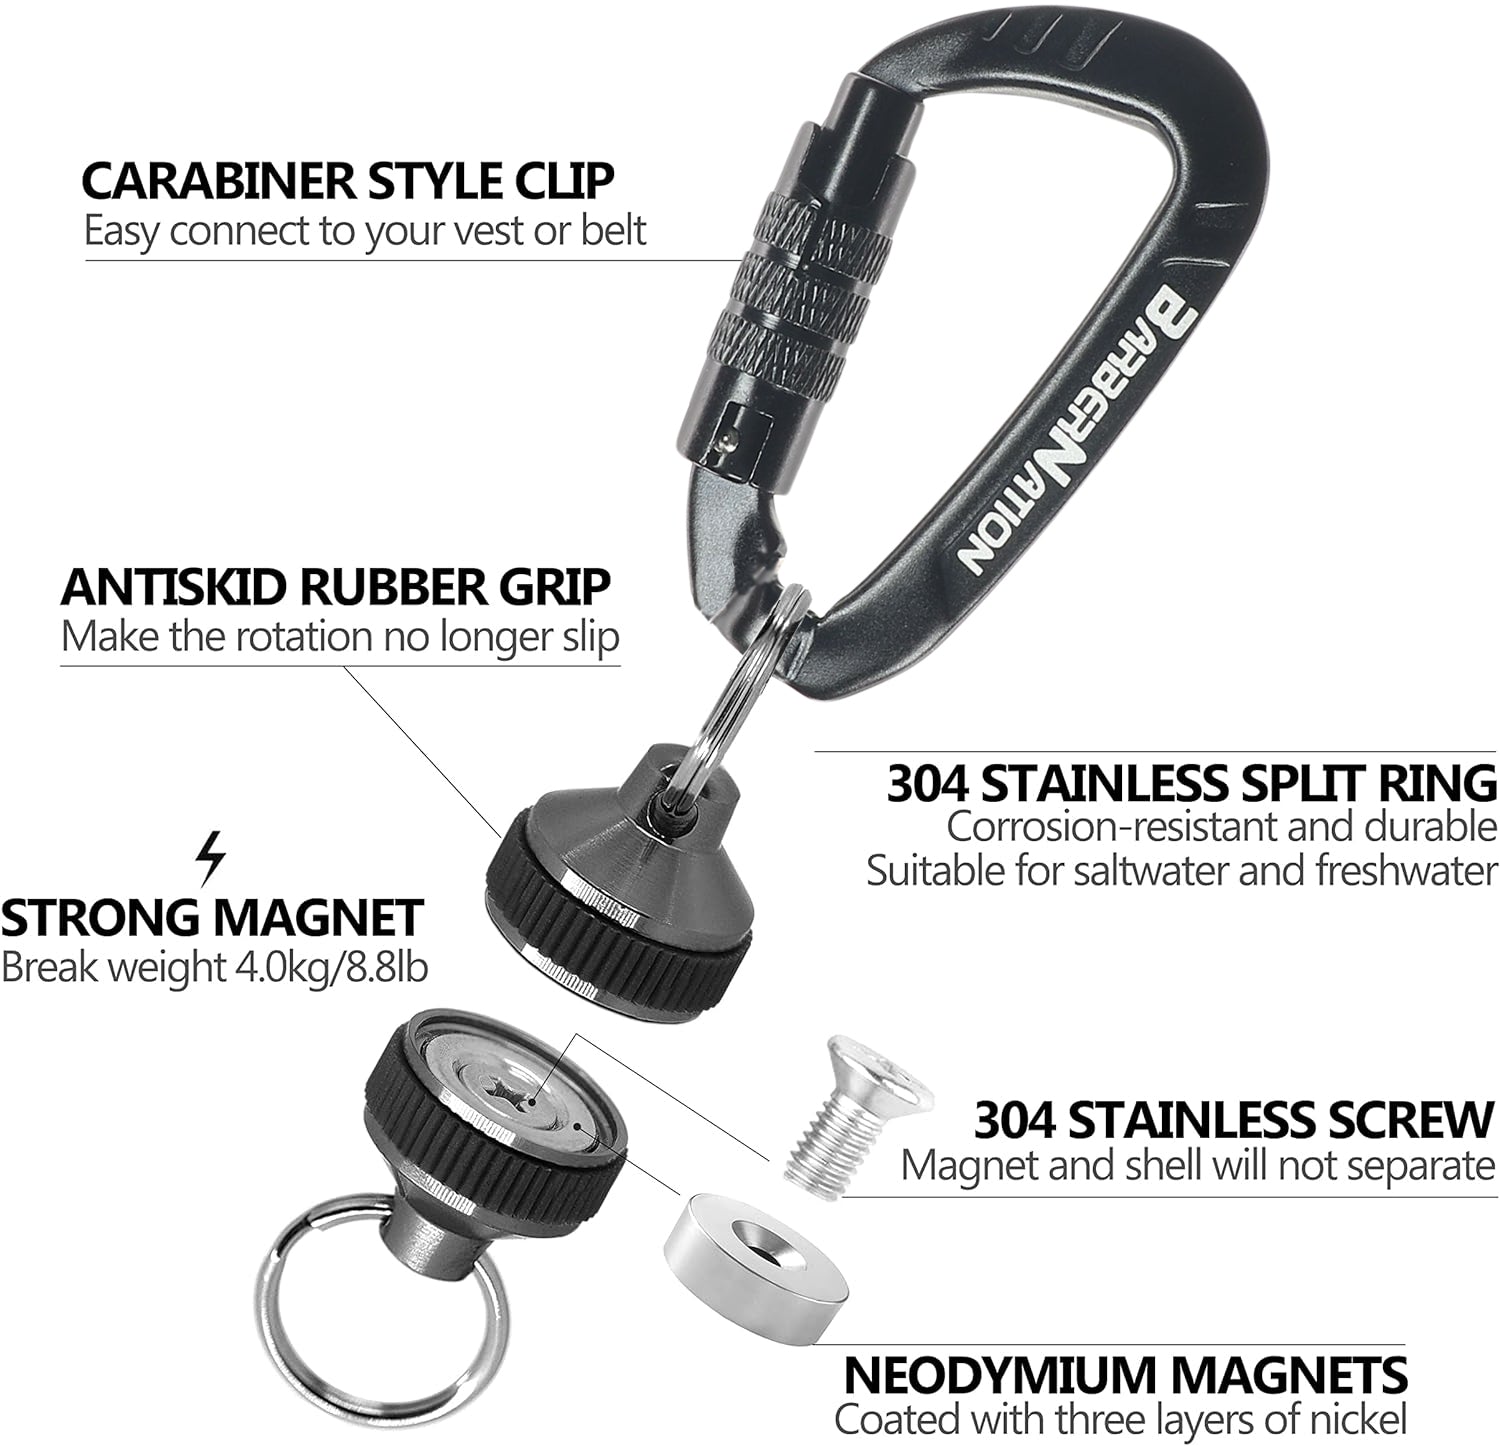 BarberNation Carabiner Pro with Super Strong Magnet Modules (2x)